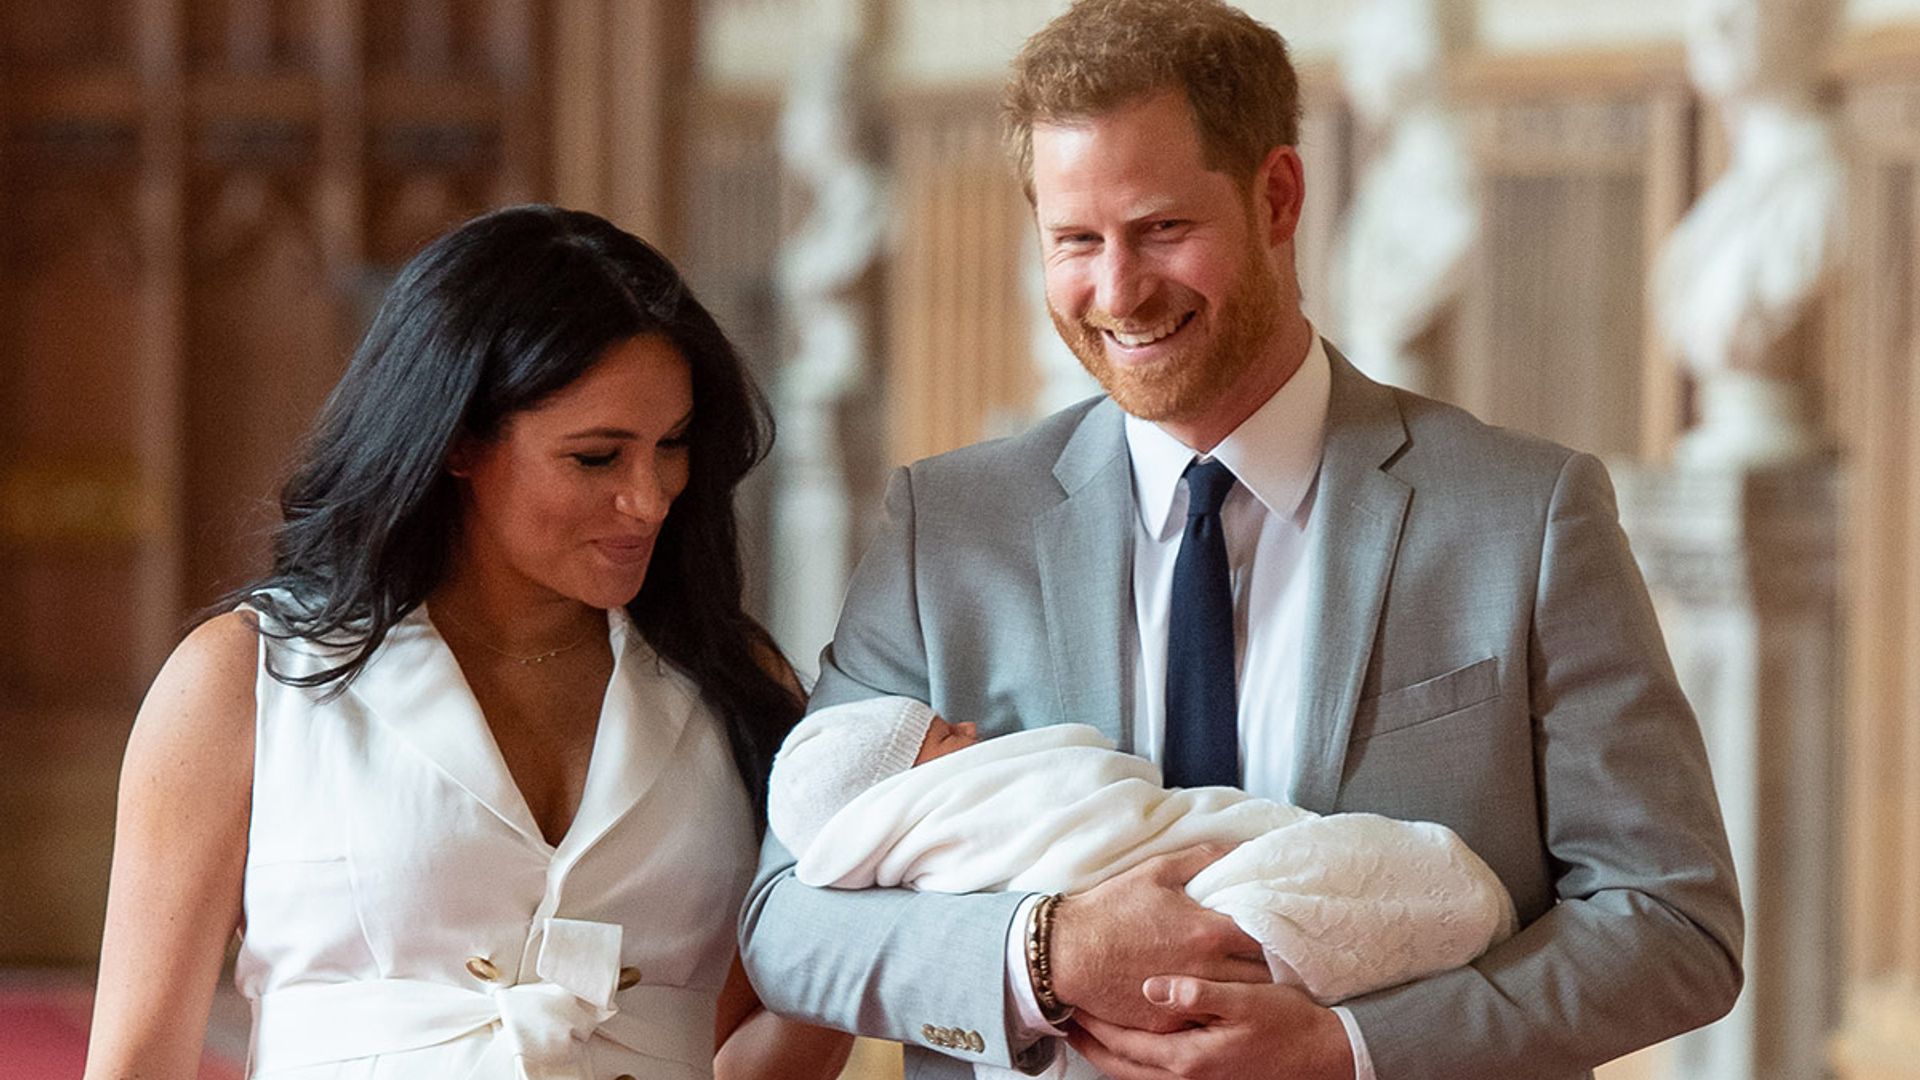 Everything you need to know about royal baby Archie Harrison's christening